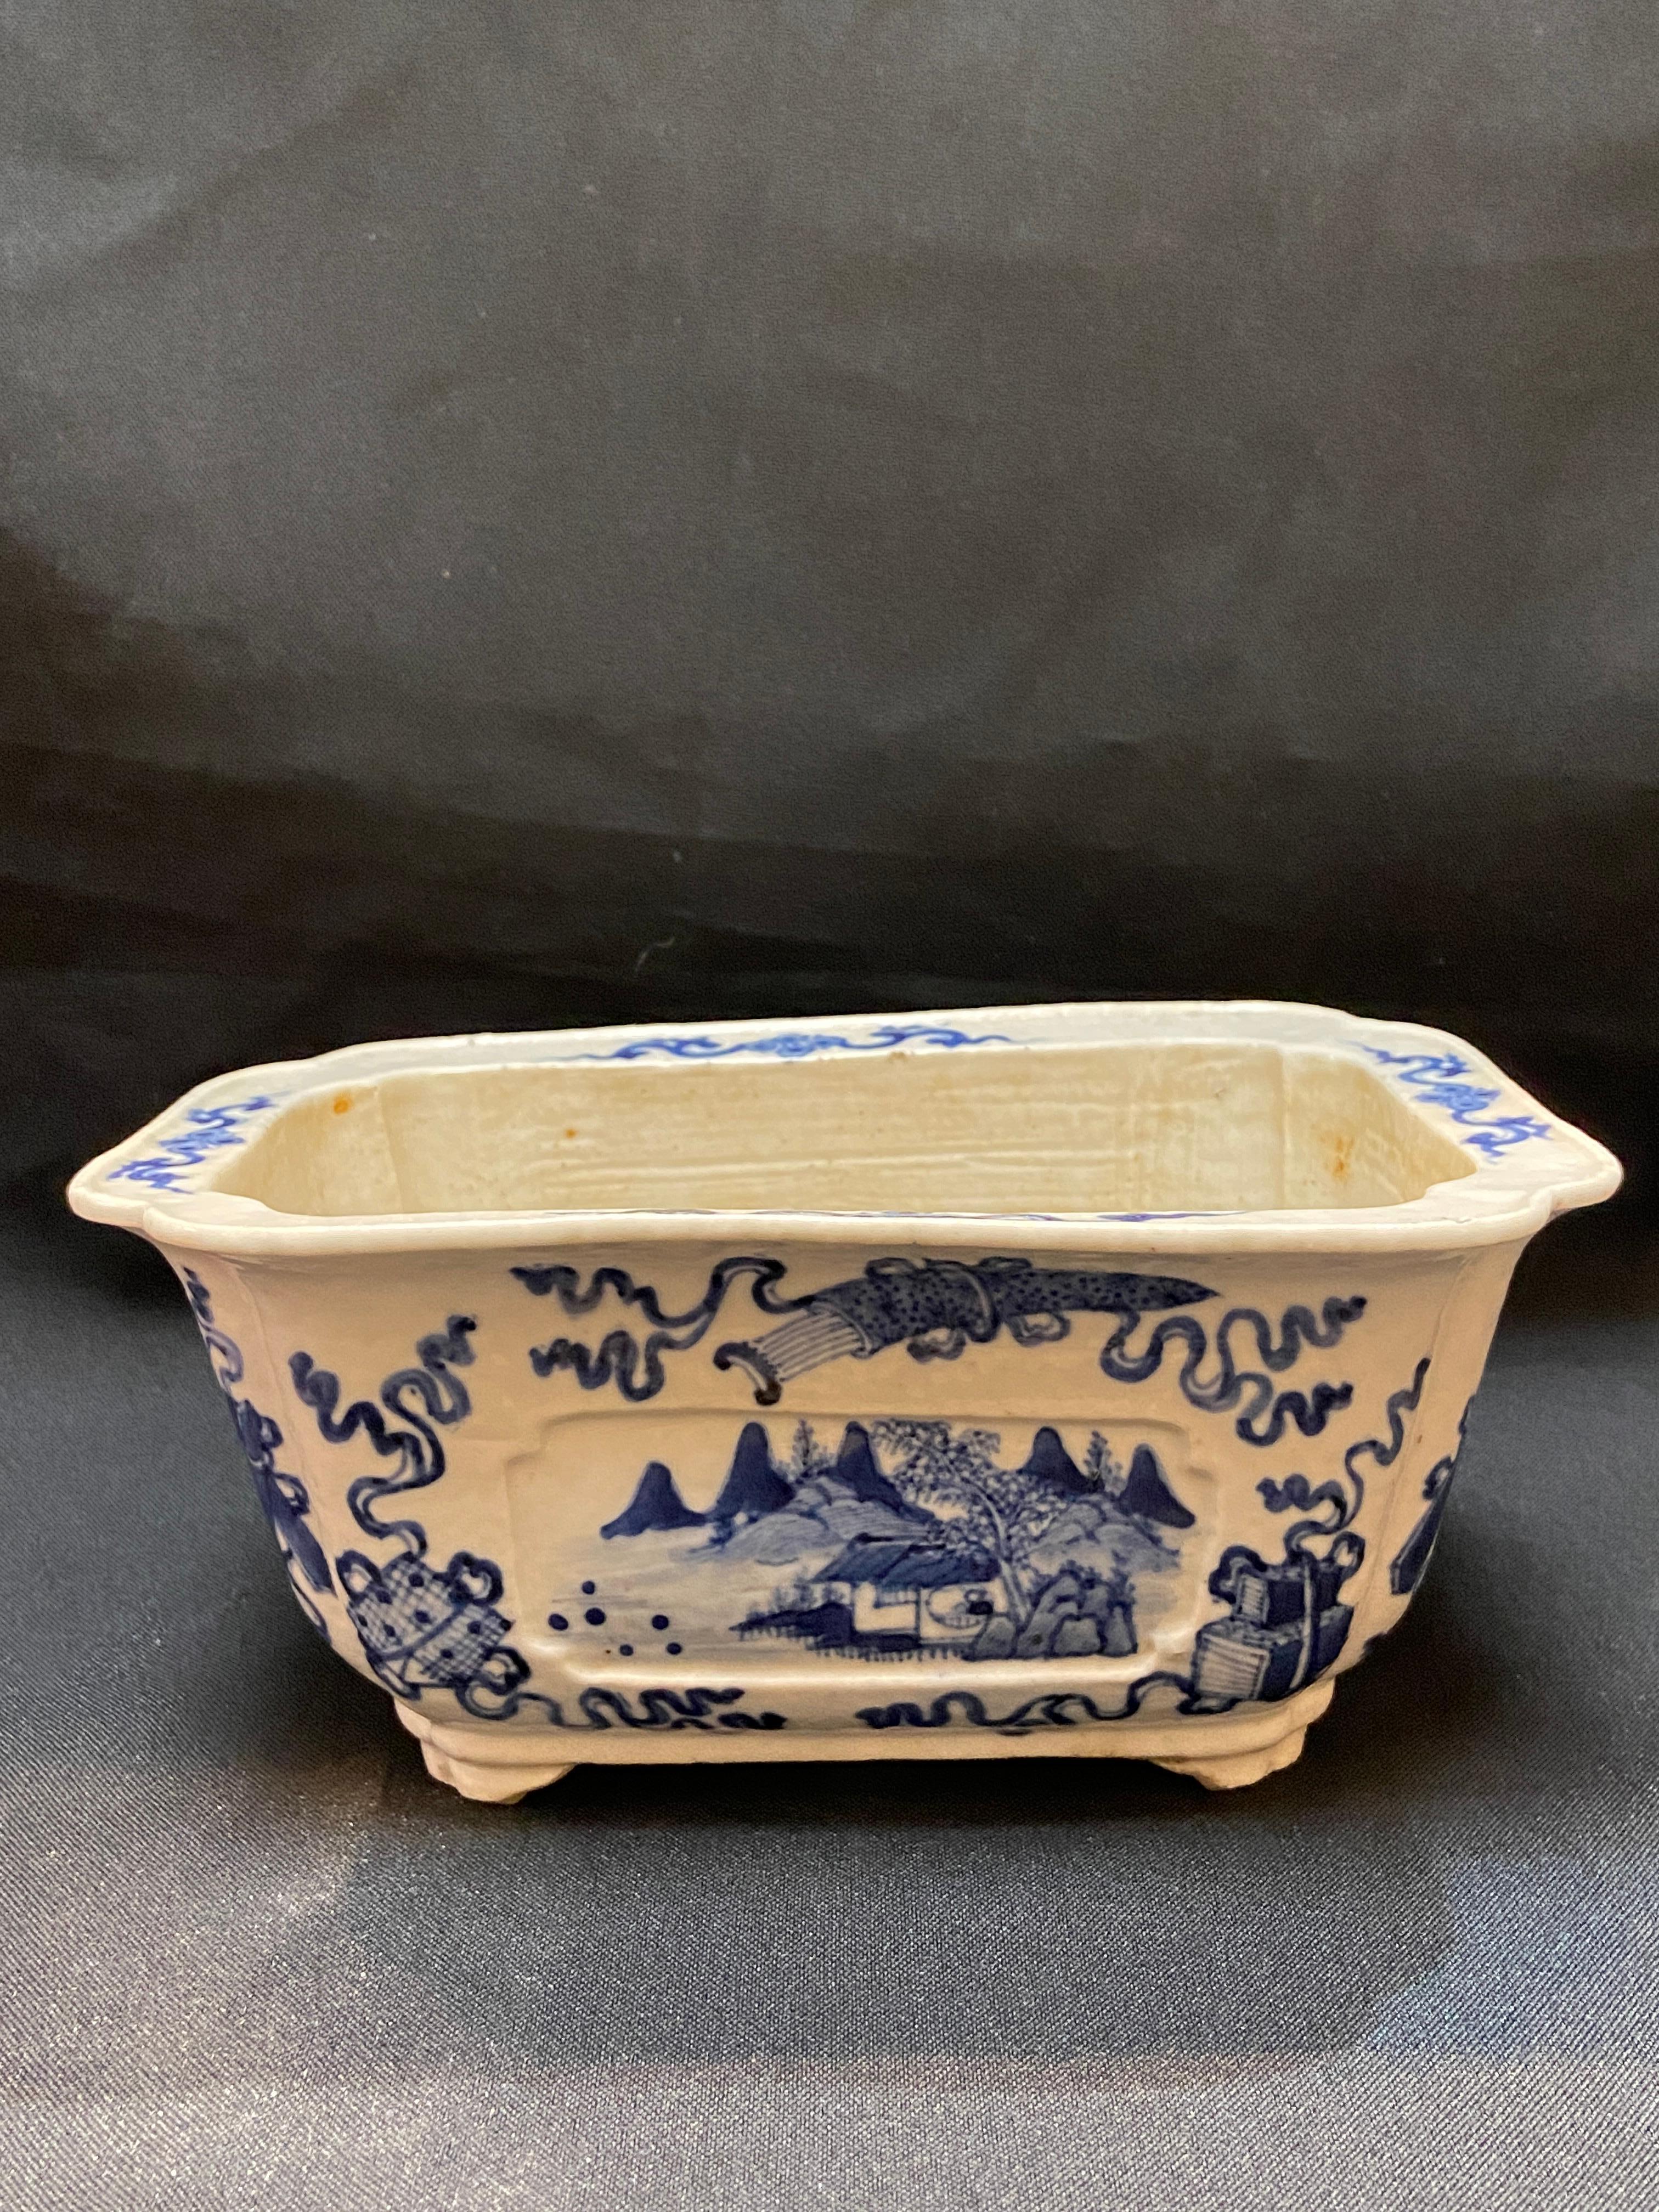 Qing， 18th century blue and white “landscape” Basin/ 清，青花山水图花盆 （全品)
Condition：Shows normal sign of wear and use，No damage or crack. please look carefully before purchase. 
Approximate size：L：20 cm，W：13.5 cm， H：9.5 cm. Please refer the size in the